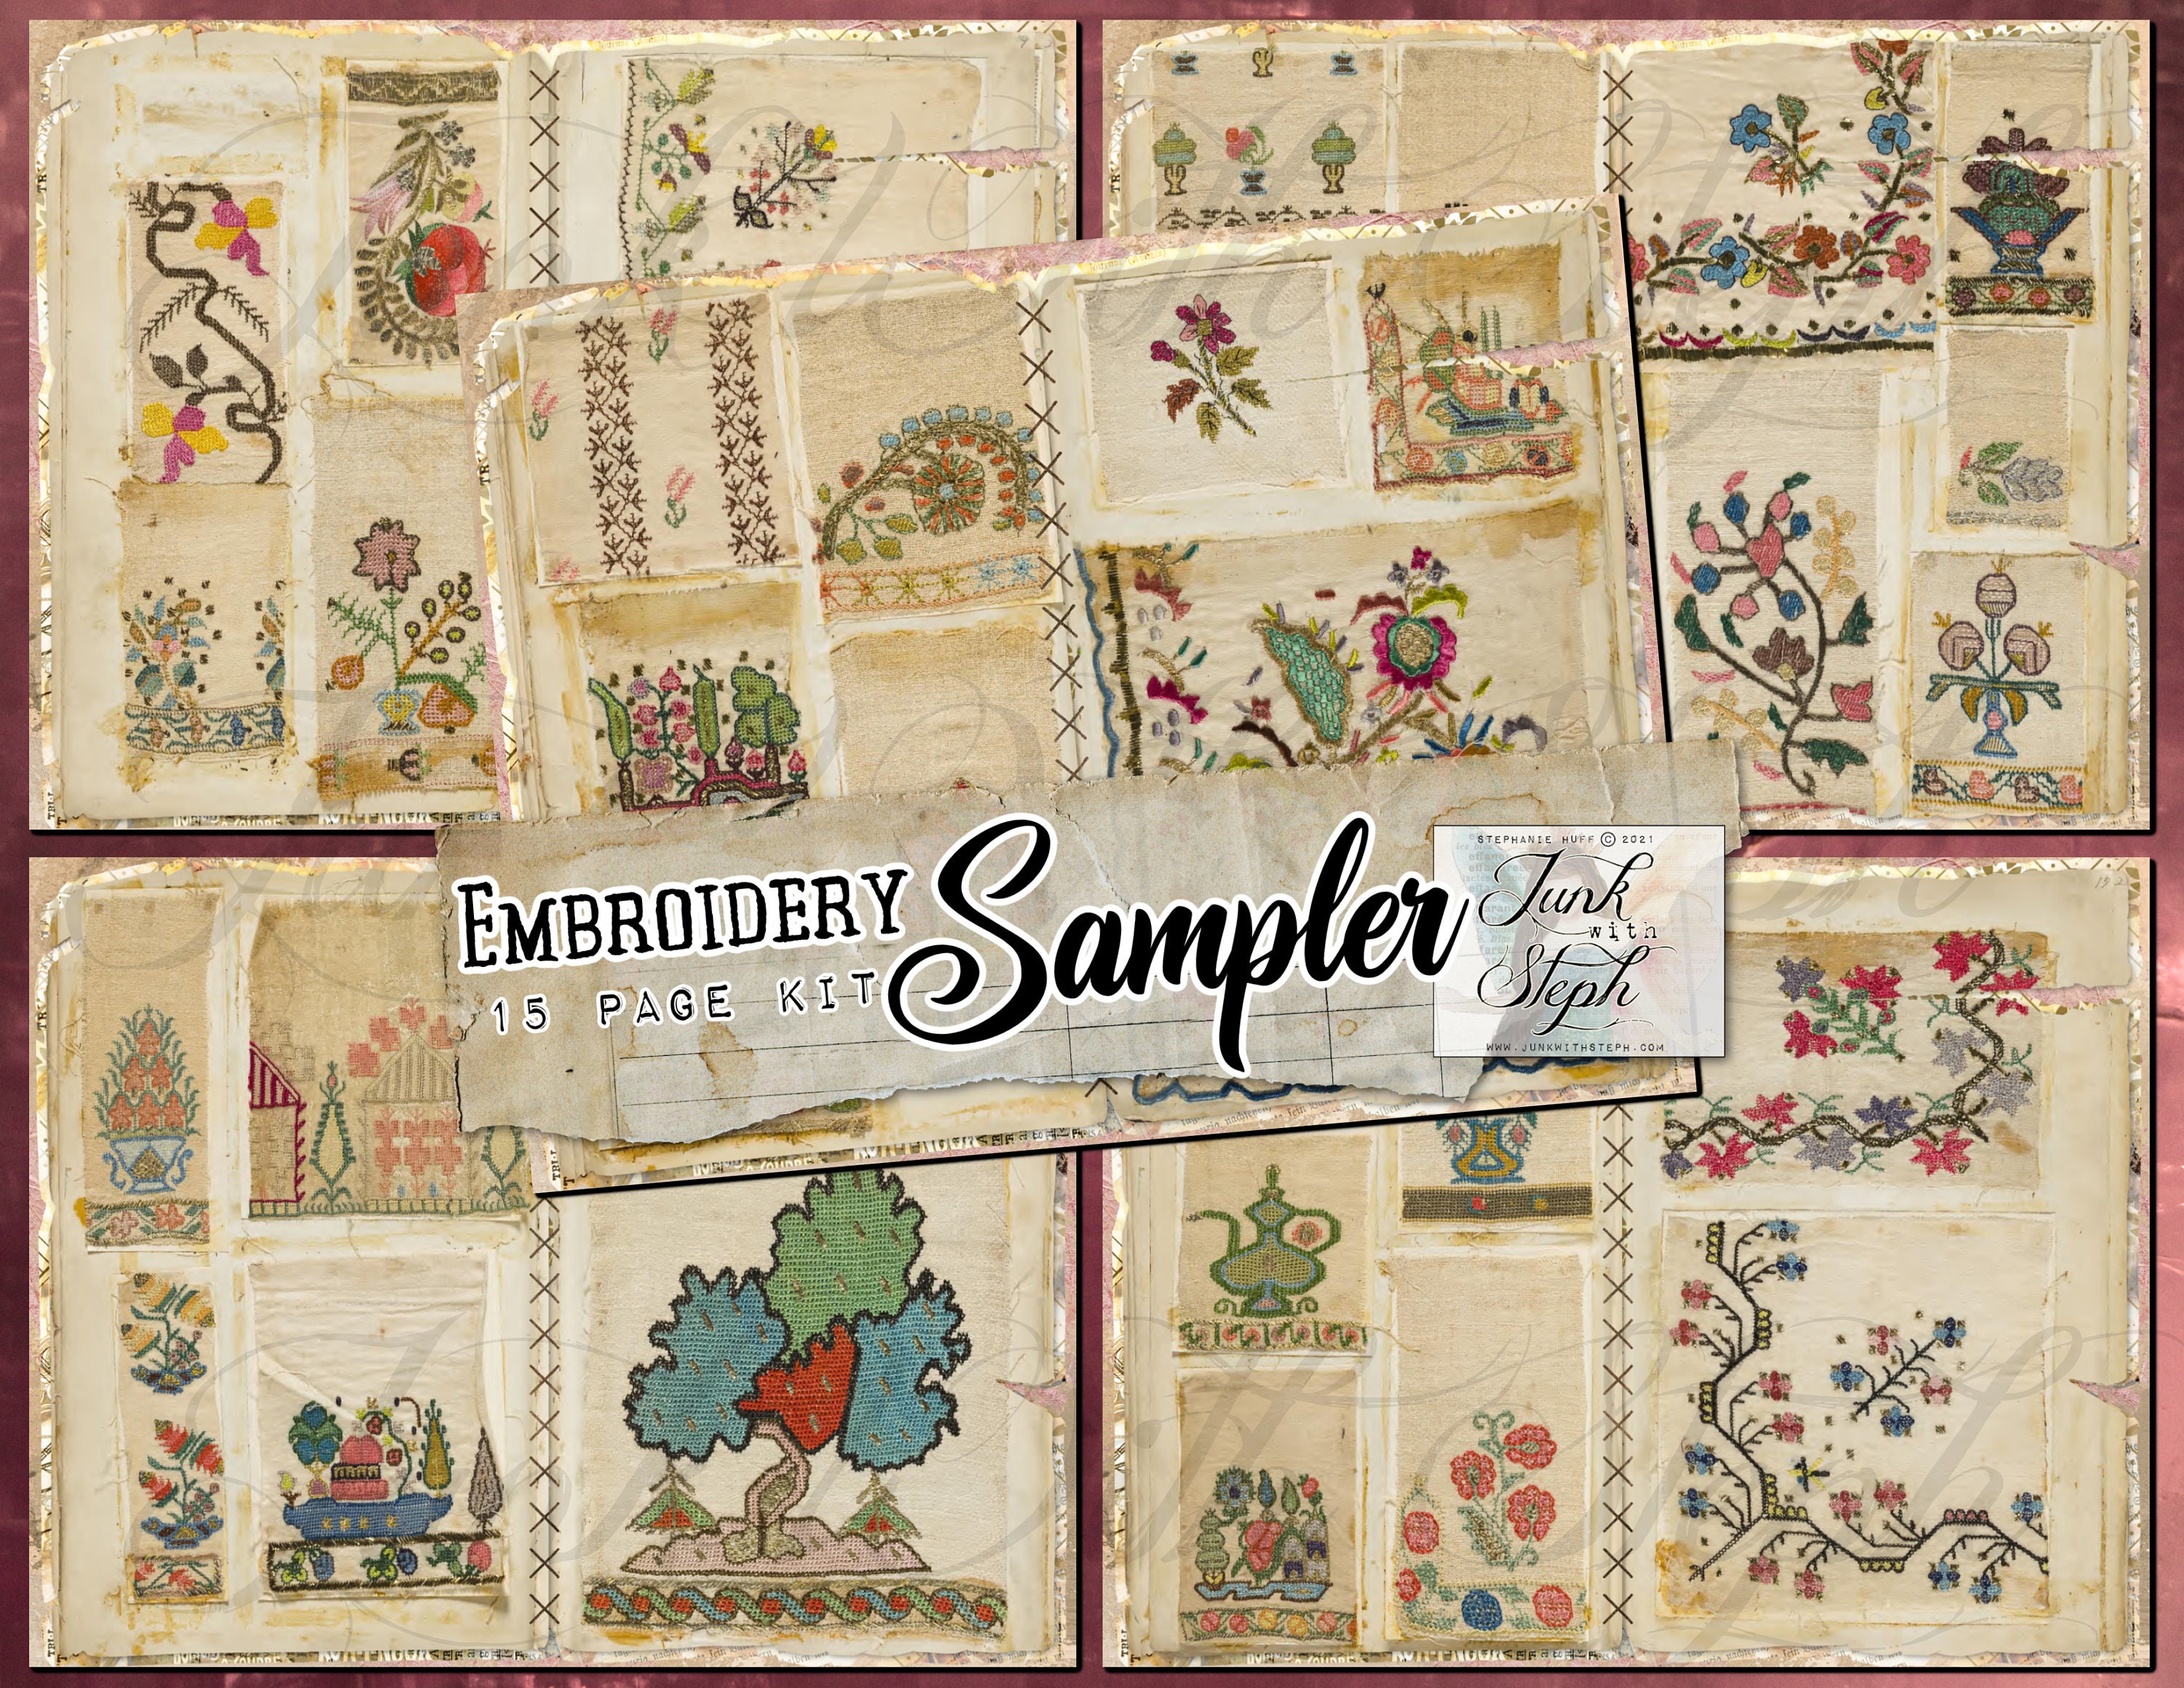 Embroidery Samples From 1800 27 Page, Digital, Junk Journal Kit, Sewing Journal  Kit, Sewing Journal Ephemera 